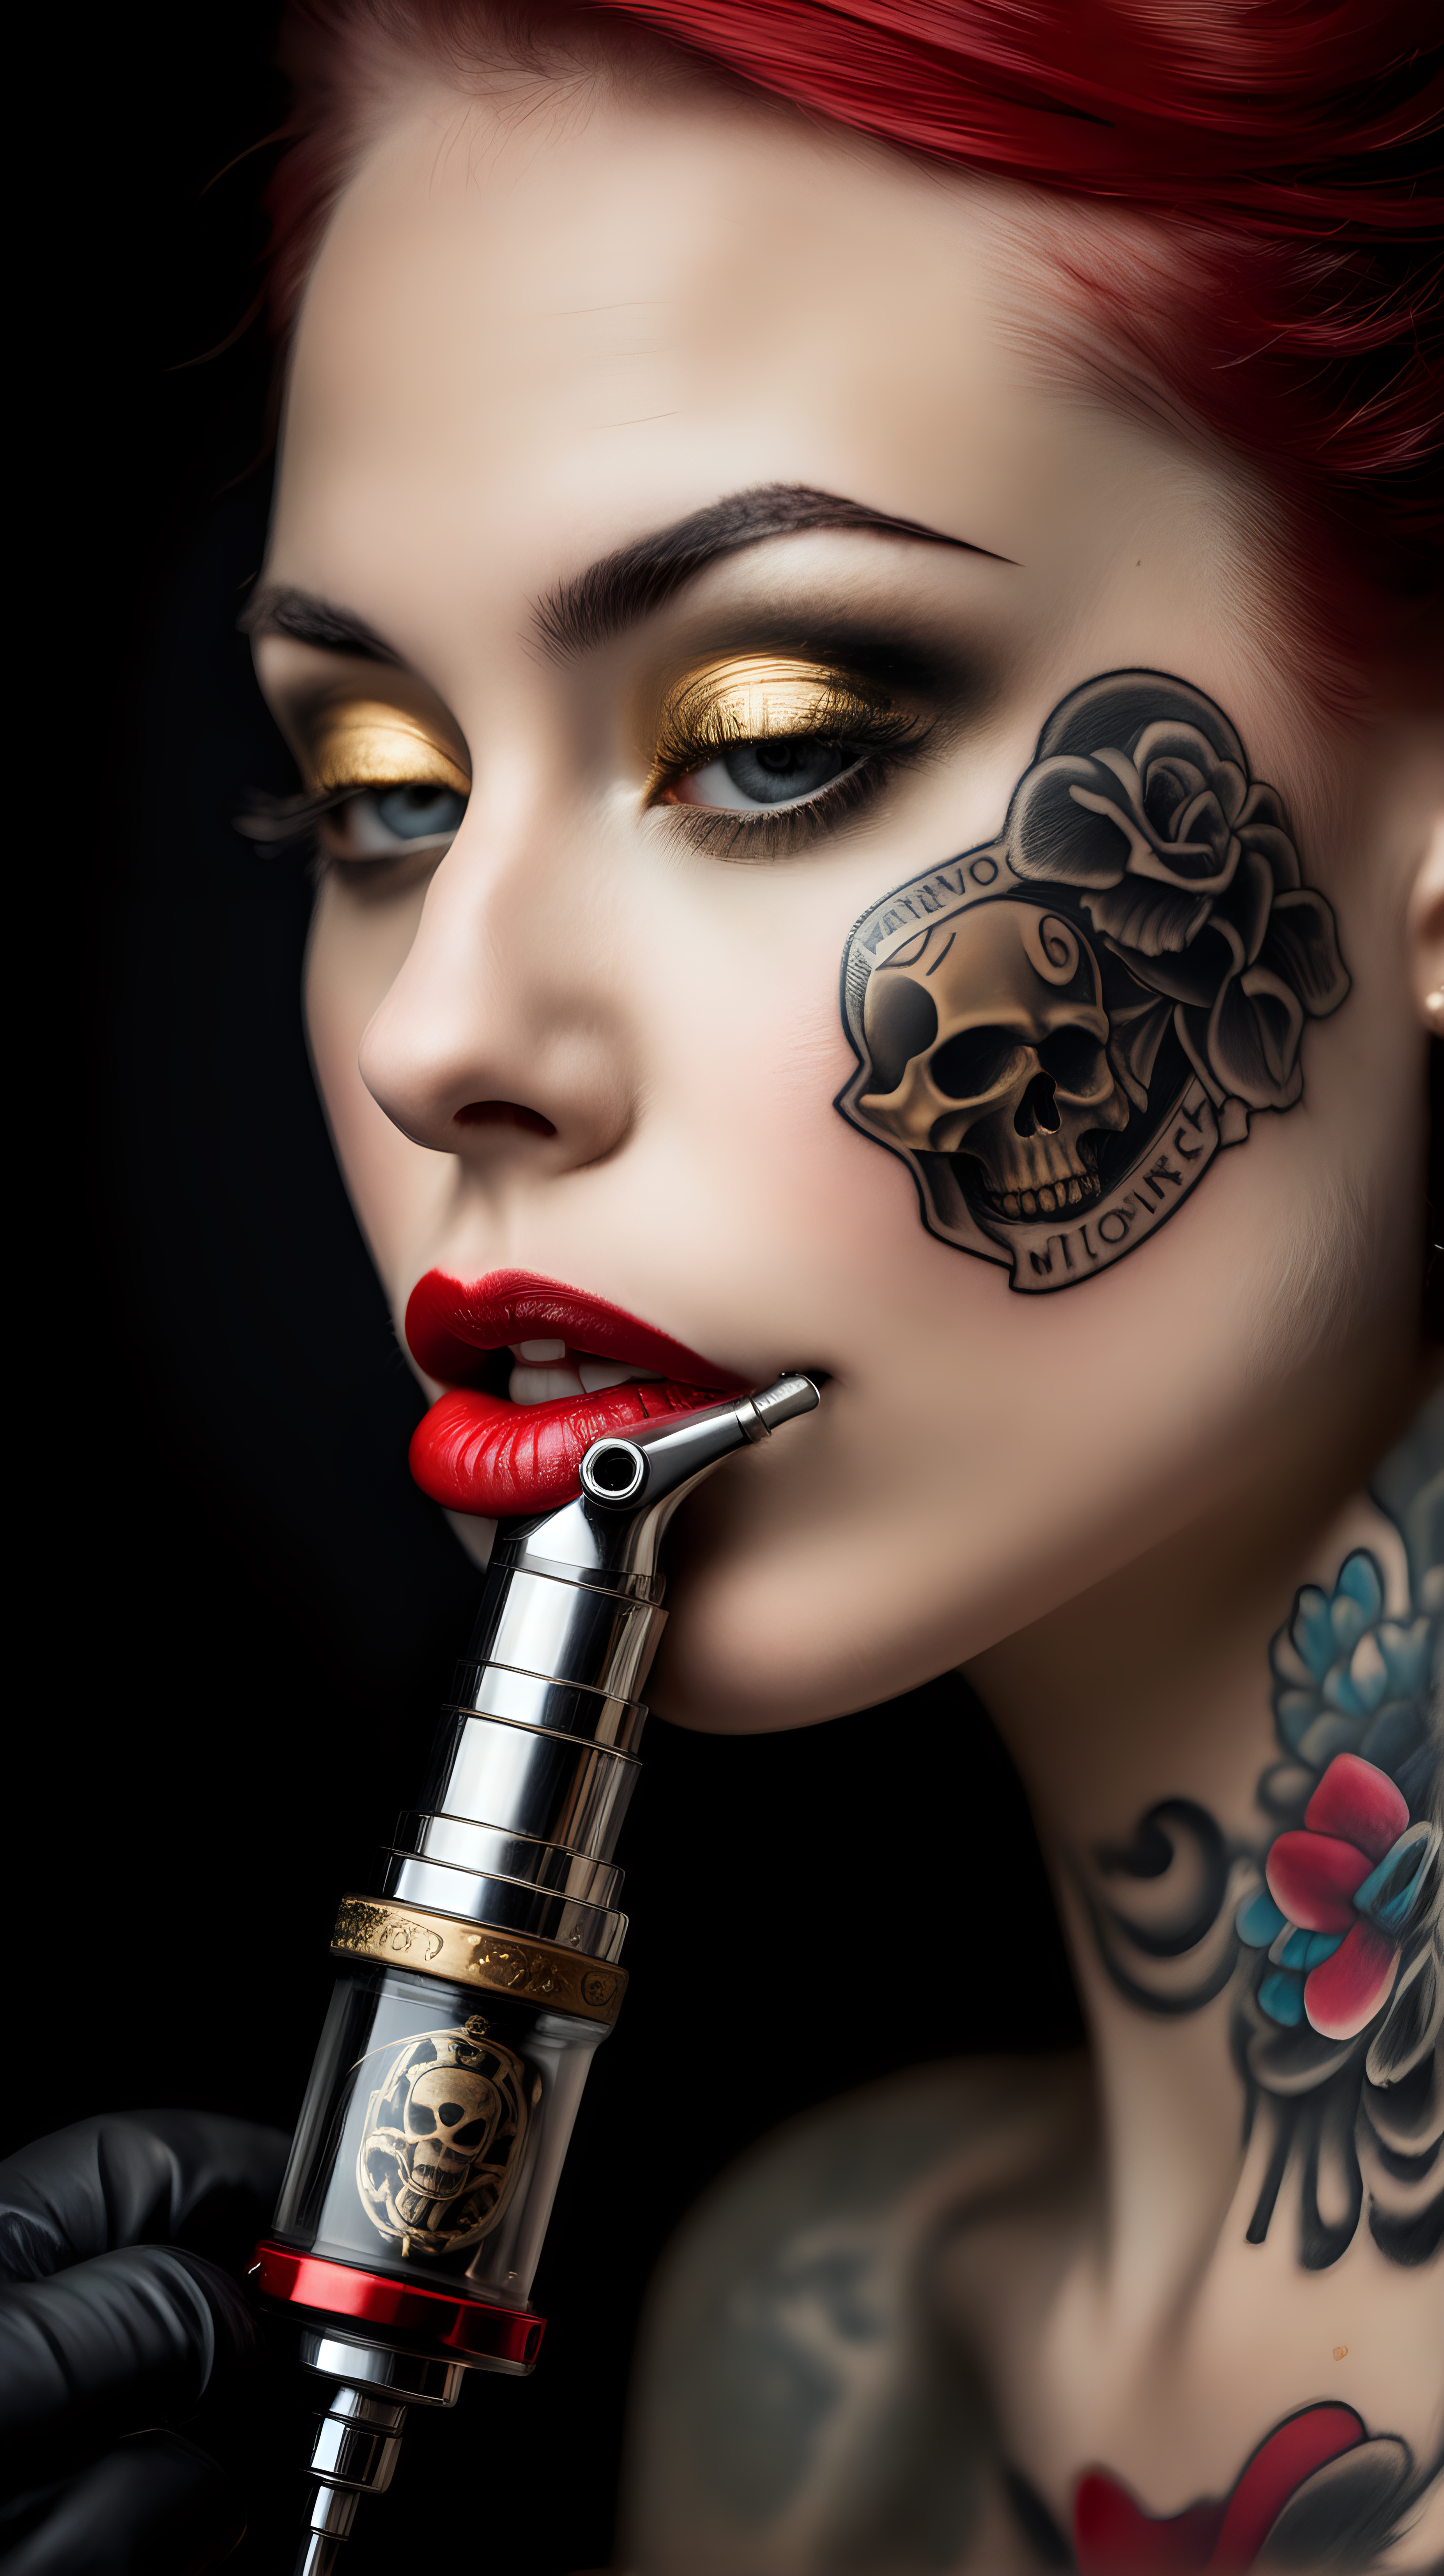 /imagine prompt : An ultra-realistic photograph captured with a canon 5d mark III camera, equipped with an macro lens at F 5.8 aperture setting, The camera is directly in front of the subject, capturing a vintage classic tattoo machine ,a pattern of the skull is engraved on it's golden tattoo grip , grabbed by a hand wearing black nitrile gloves . A beautiful woman whose only lips are visible in the picture is kissing the handle of the tattoo machine with her lips painted with red lipstick.
the hand is blurred and the focus sets on tattoo machine .
Soft spot light gracefully illuminates the subject and golden grip is shining. The background is absolutely black , highlighting the subject.
The image, shot in high resolution and a 16:9 aspect ratio, captures the subject’s  with stunning realism –ar 9:16 –v 5.2 –style raw
